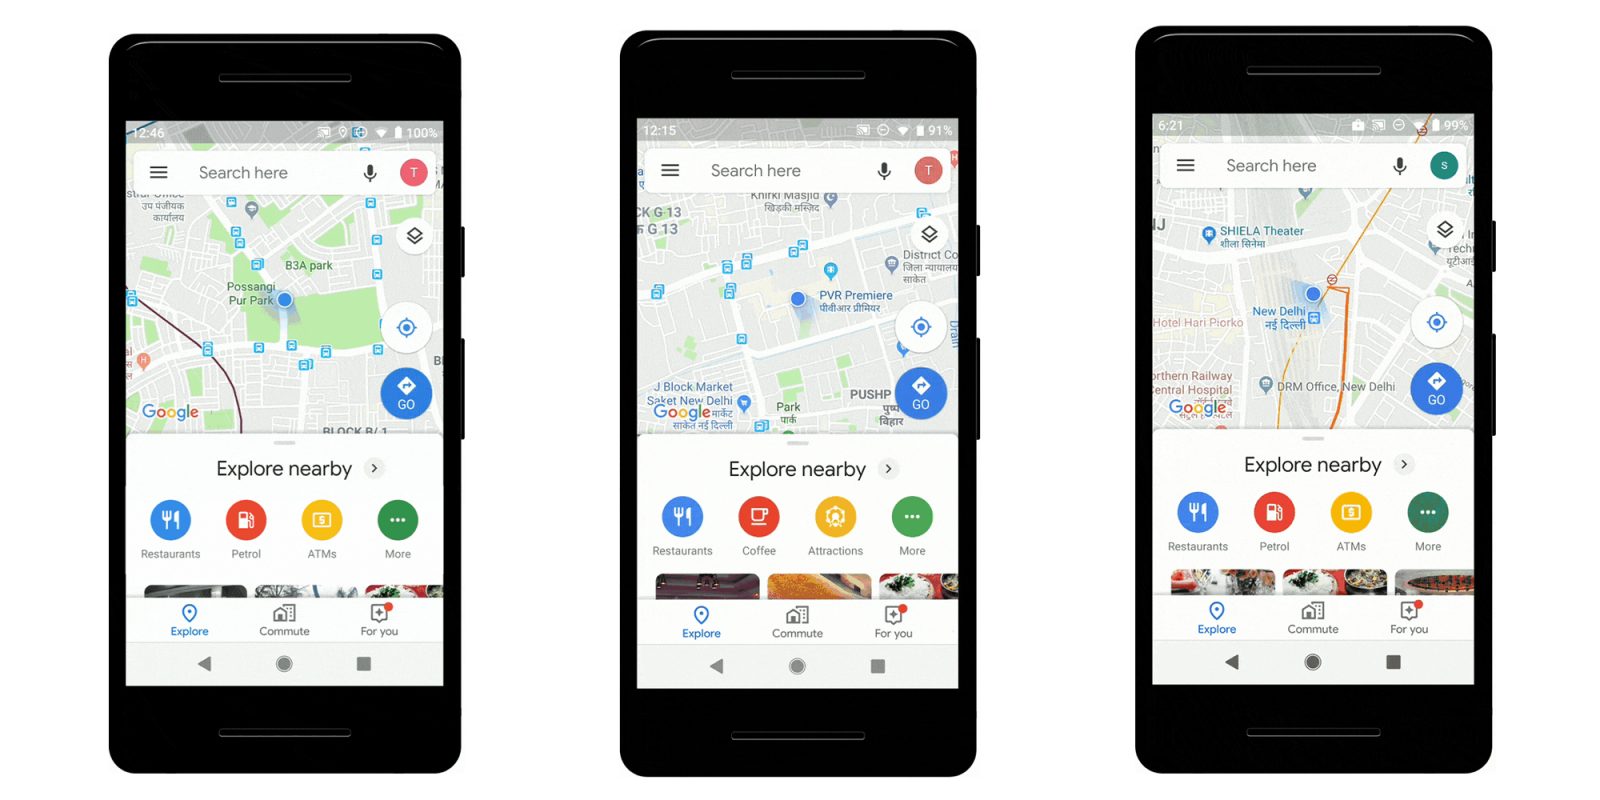 Google Maps live transport times in India